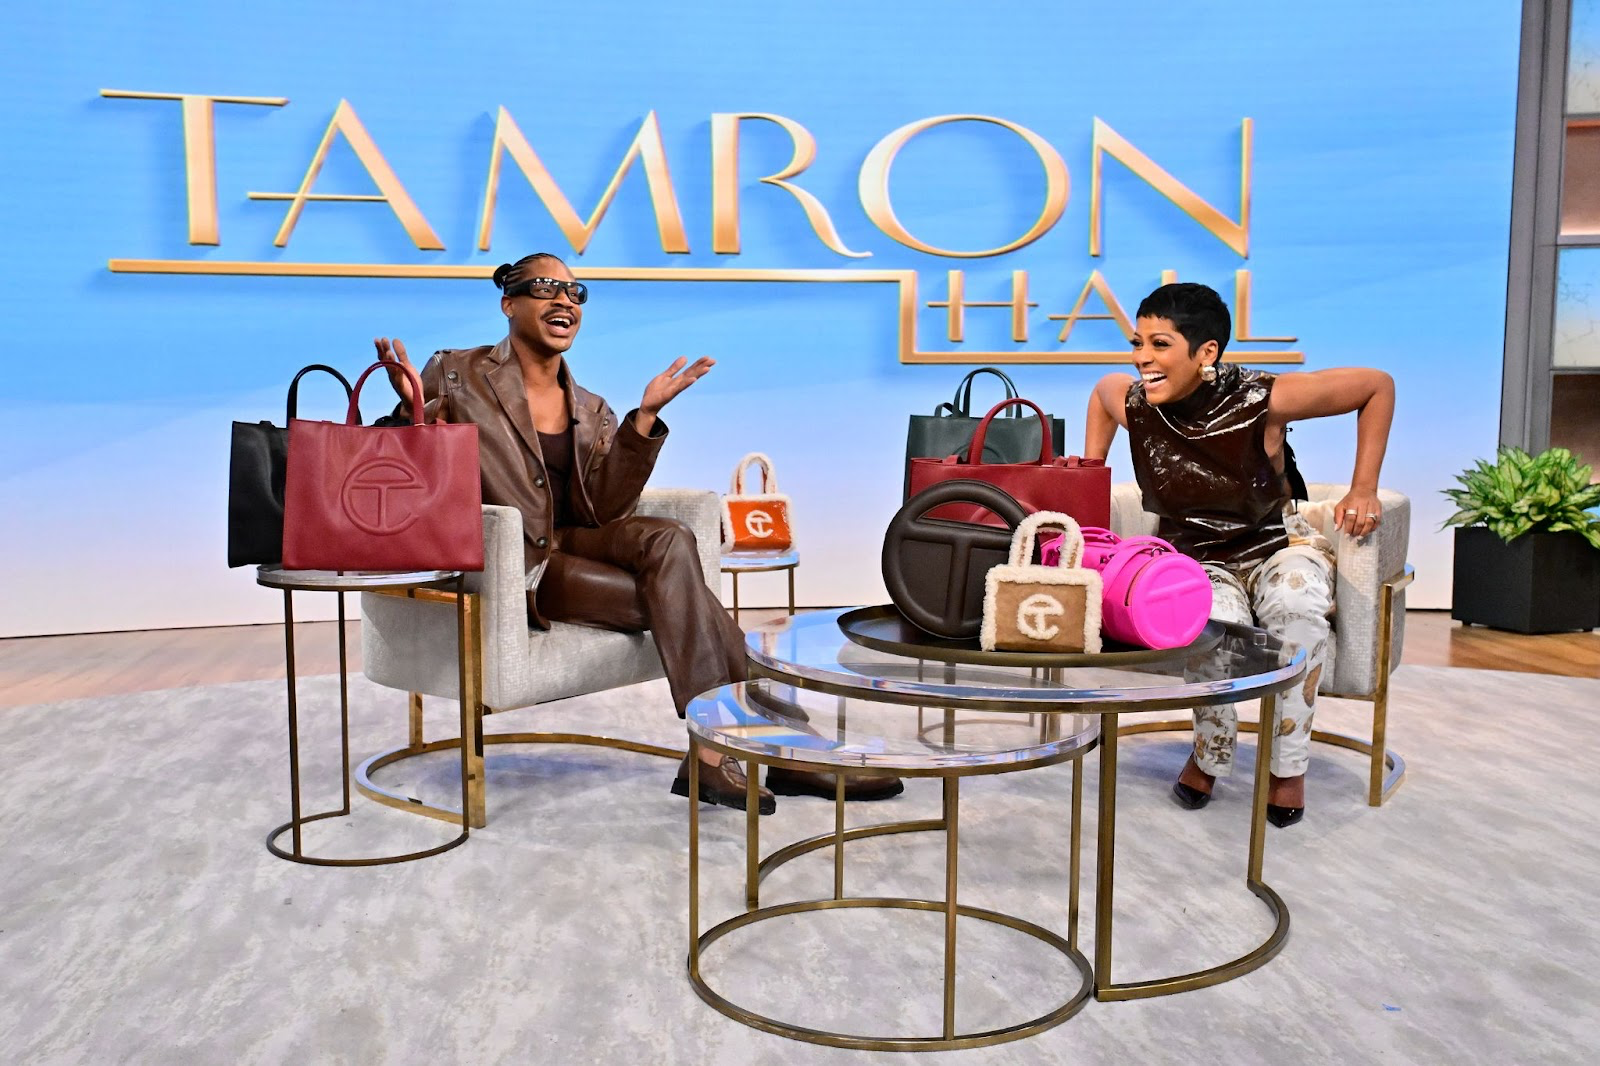 Designer Telfar Clemens Announces Special Giveaway on ‘Tamron Hall’ Show